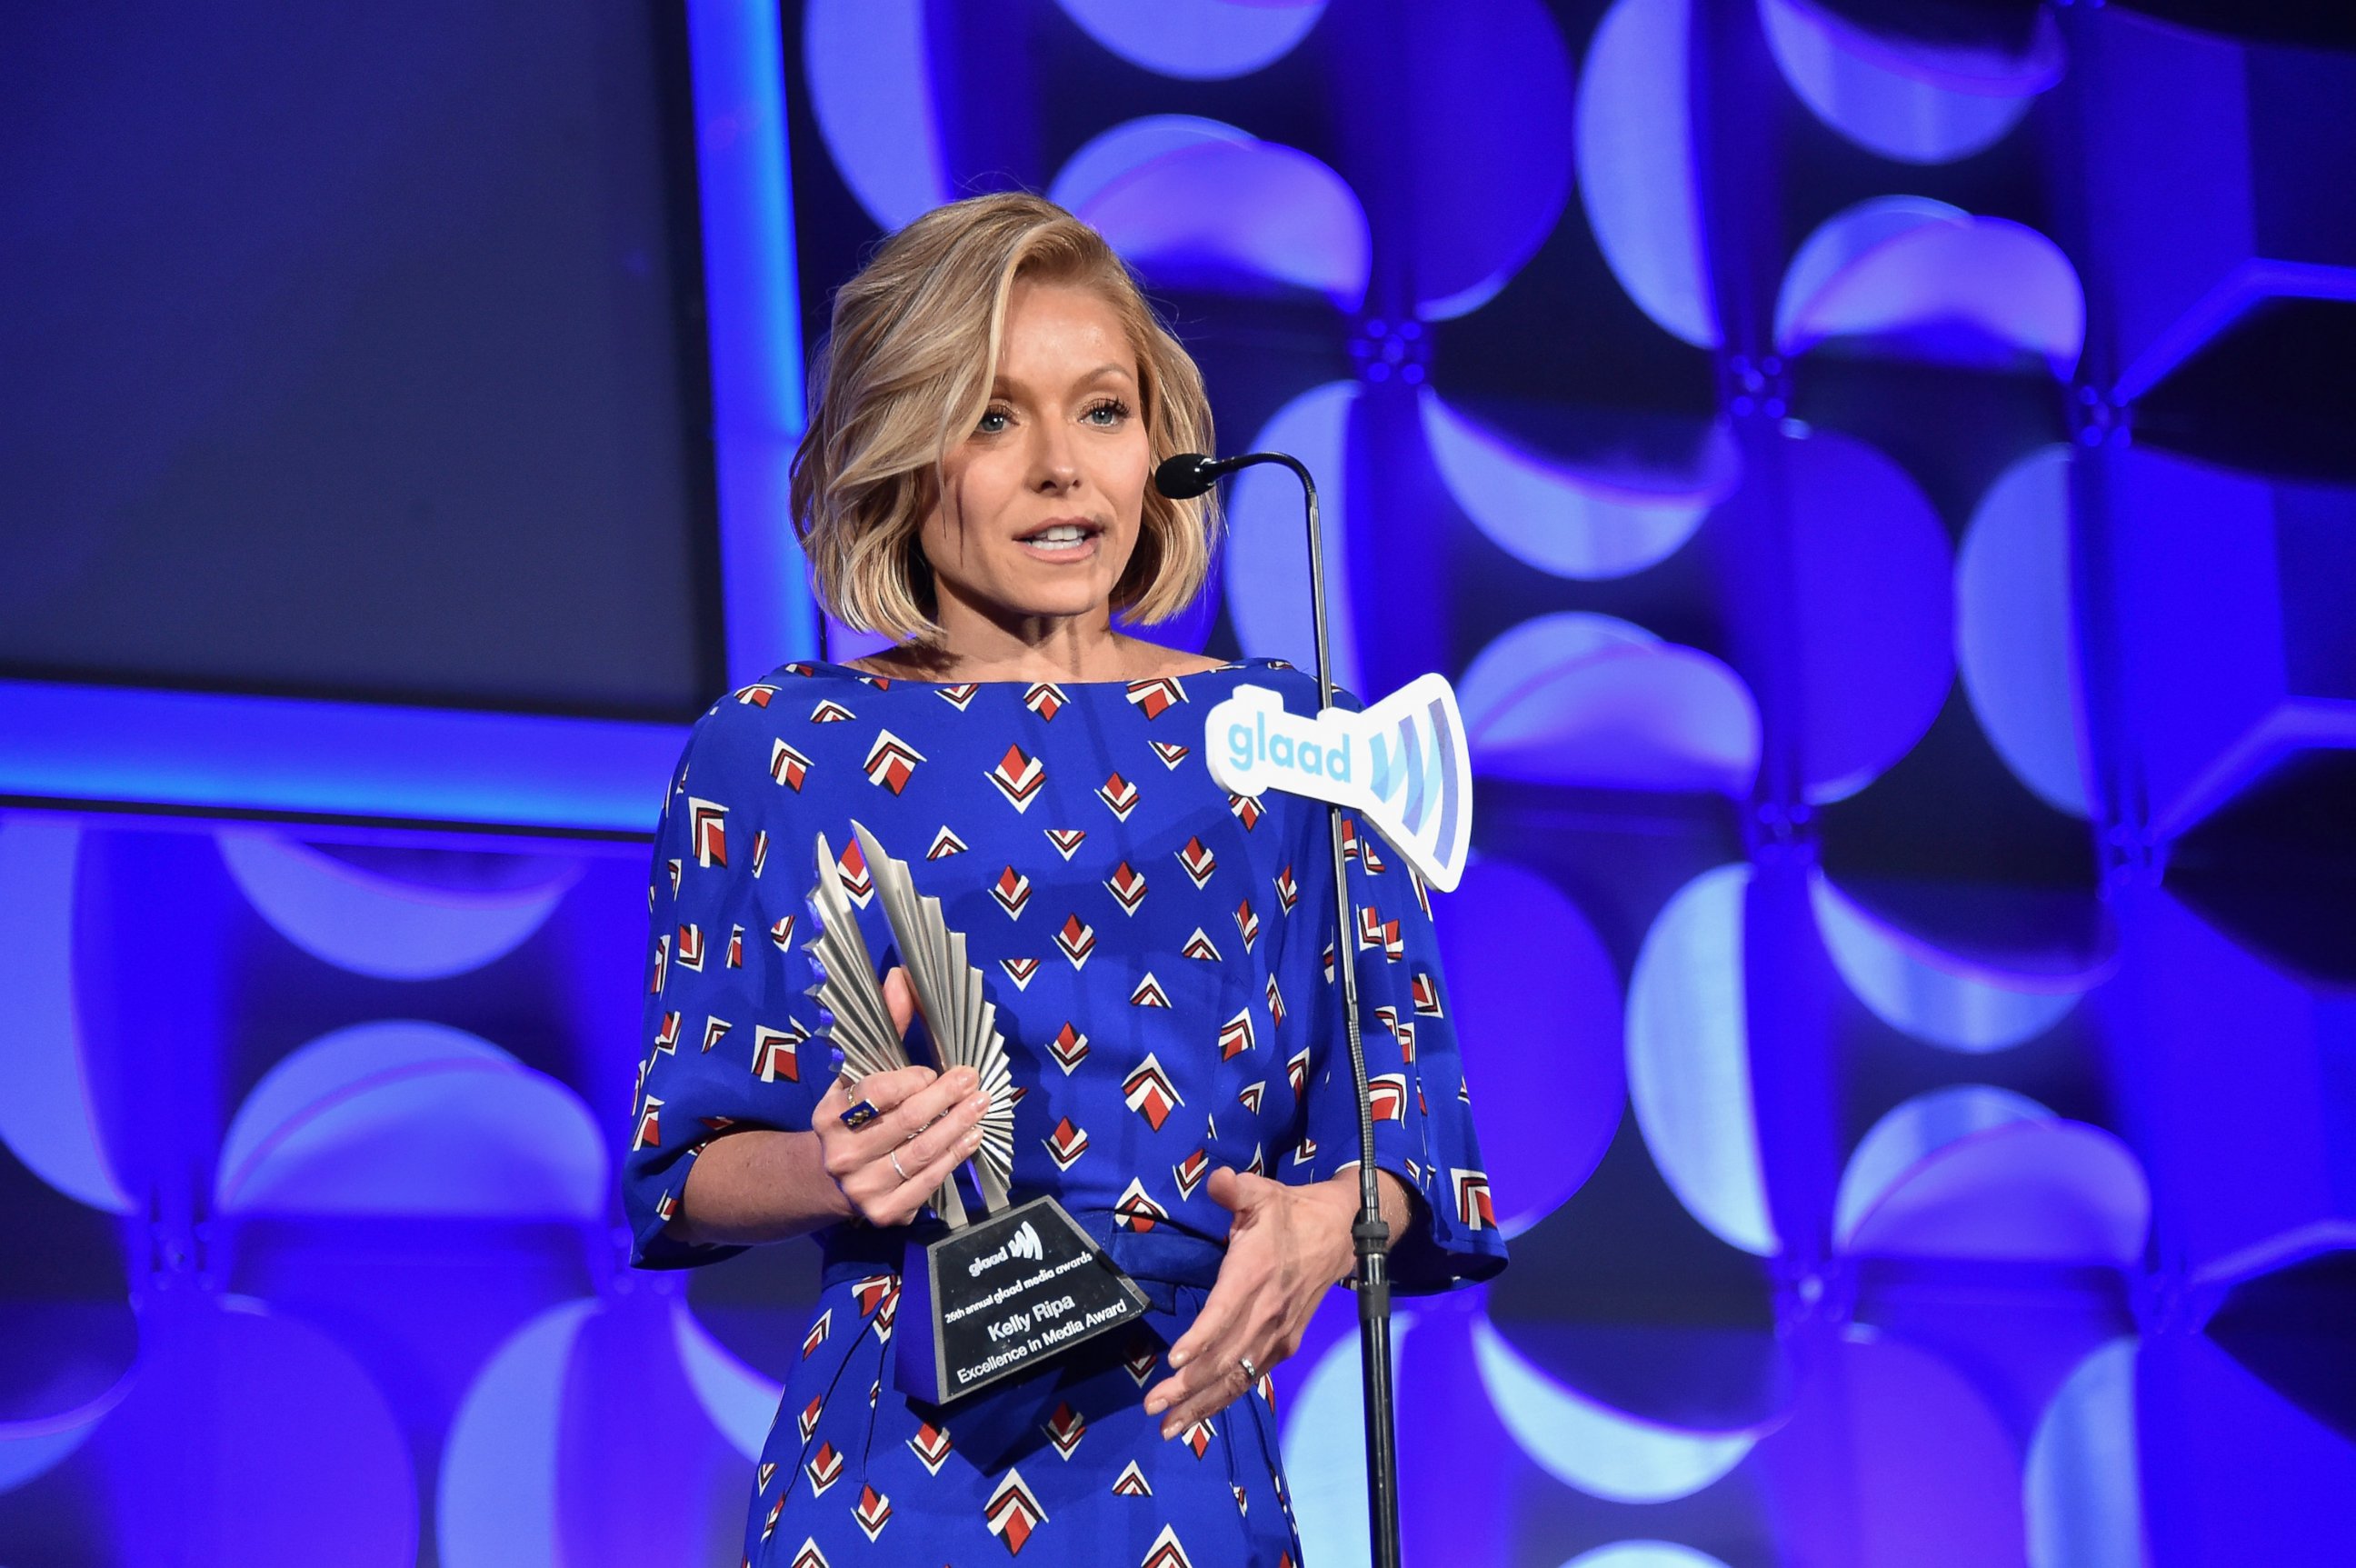 PHOTO: Kelly Ripa speaks on stage at 26th Annual GLAAD Media Awards In New York on May 9, 2015 in New York City.  